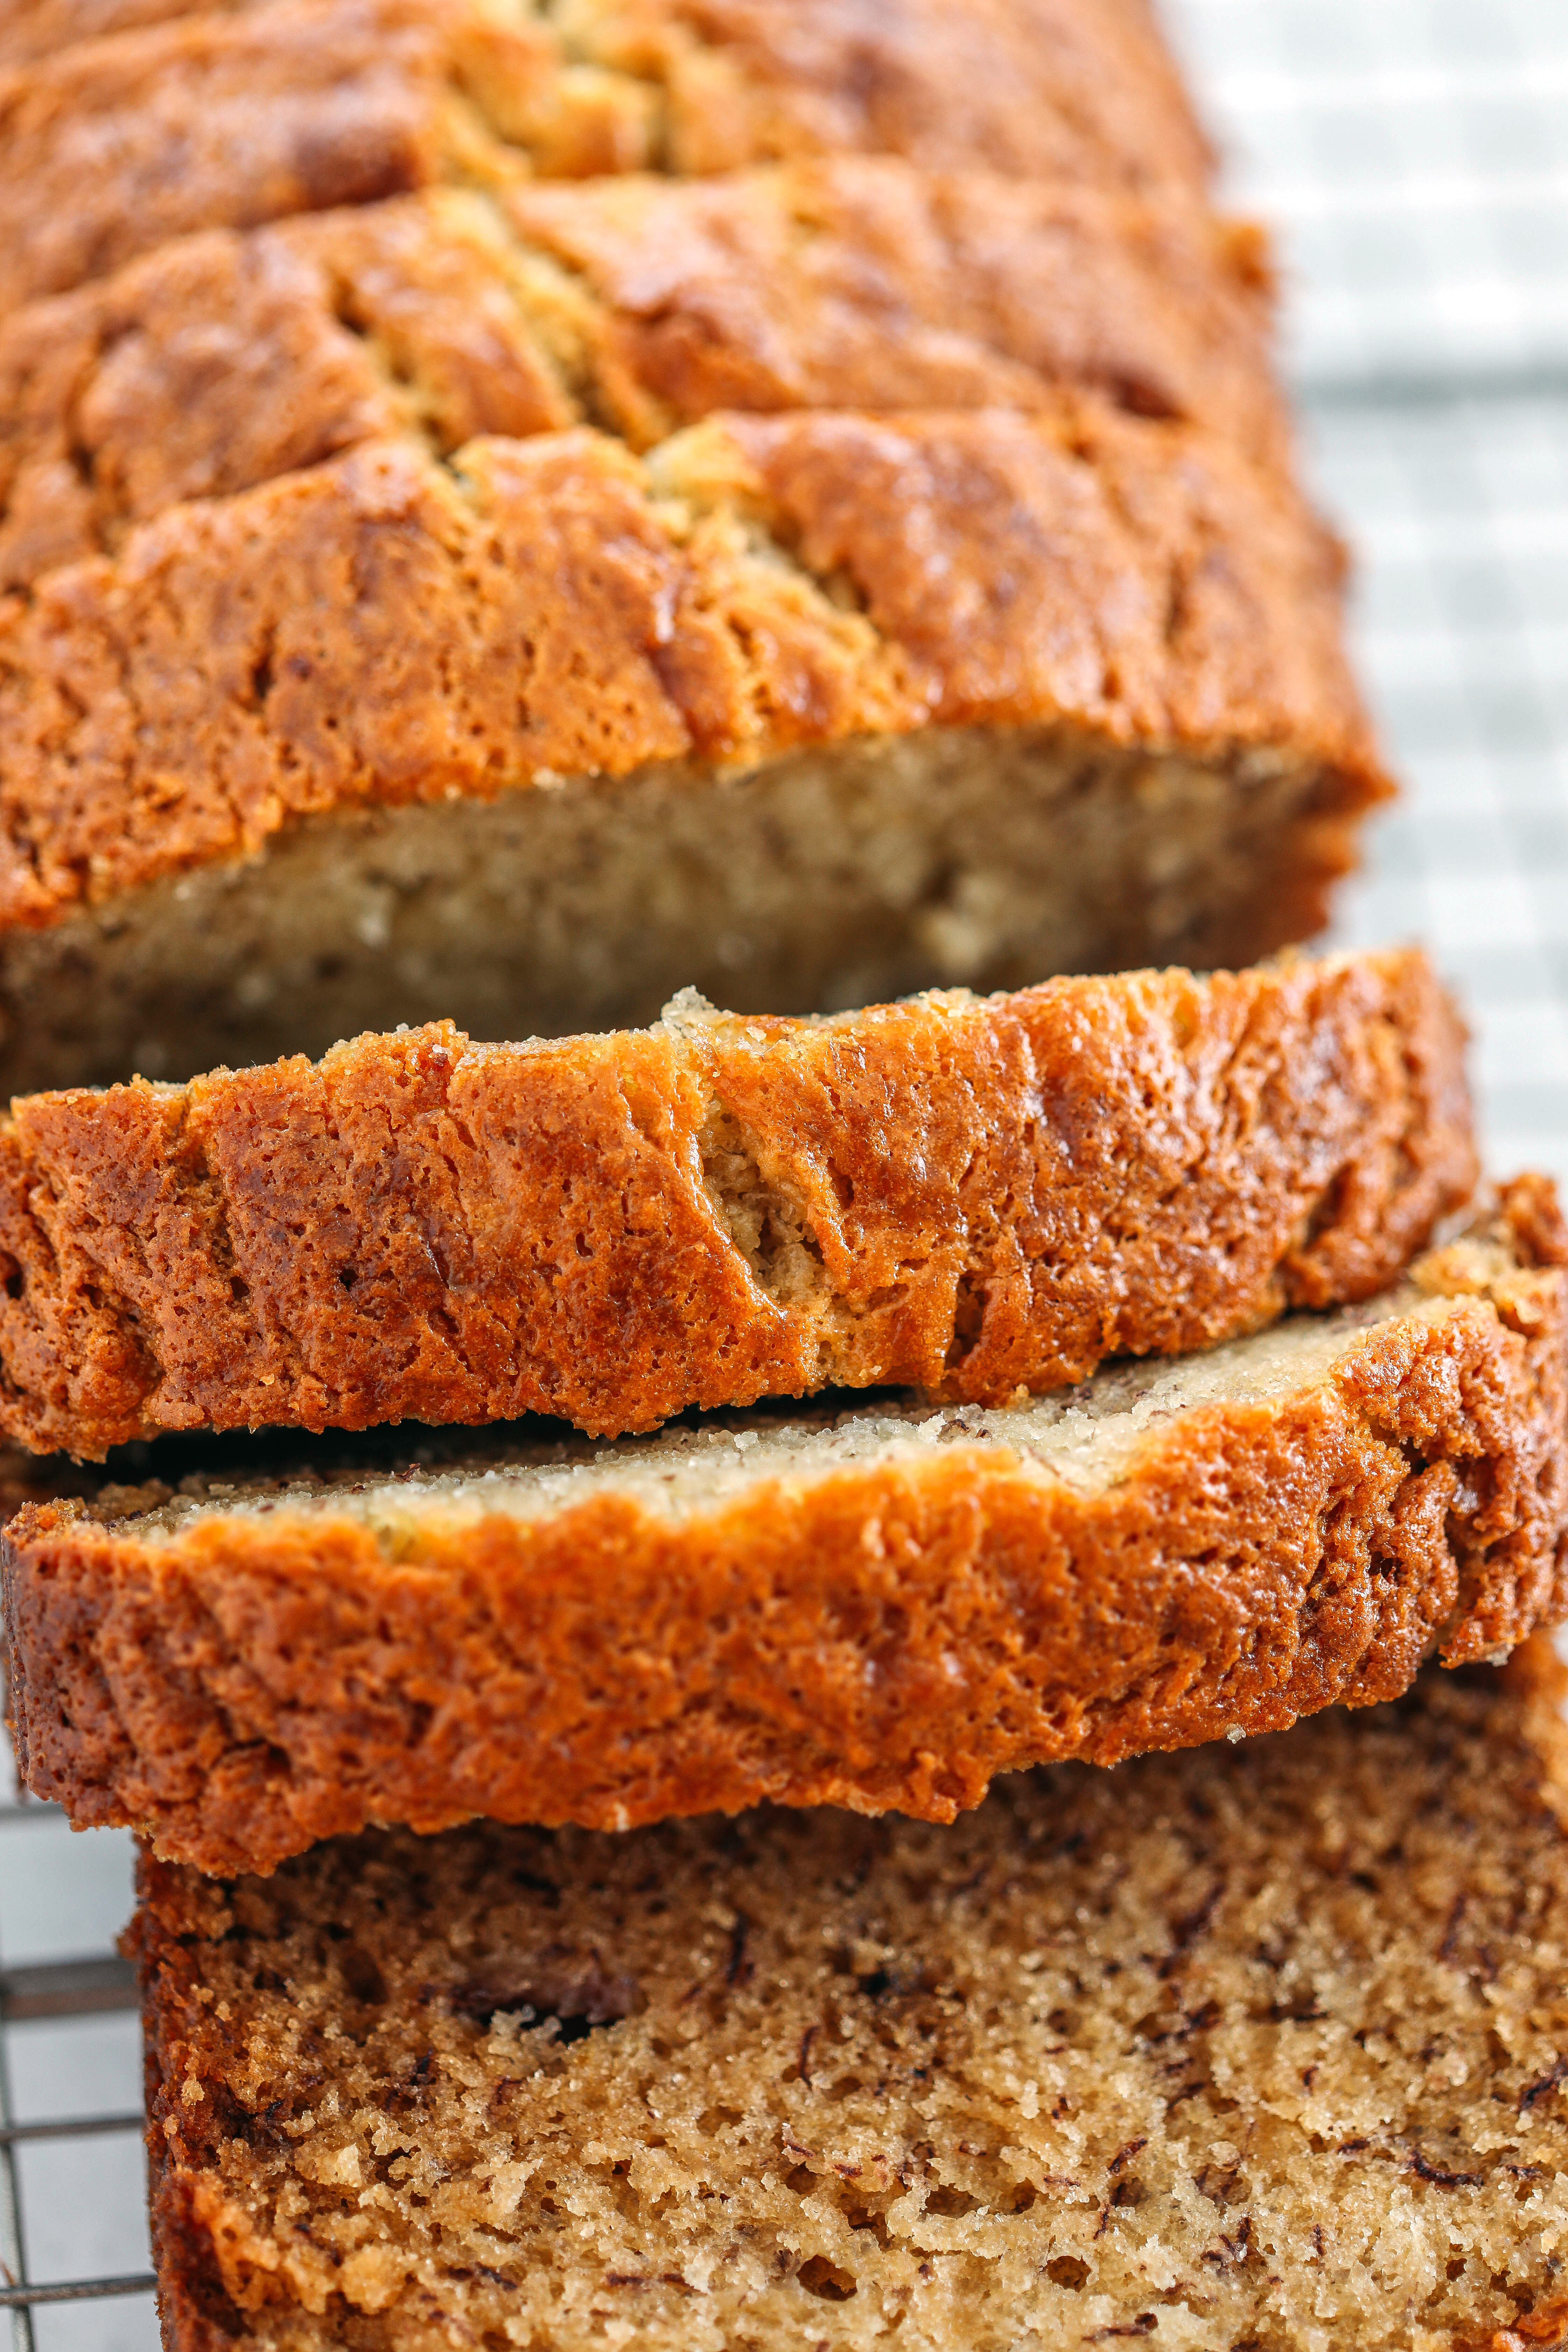 My Grandma's tried and true Easy Banana Bread recipe is a classic favorite and hands down the BEST!  Perfectly sweet, super moist and loaded with delicious banana flavor!